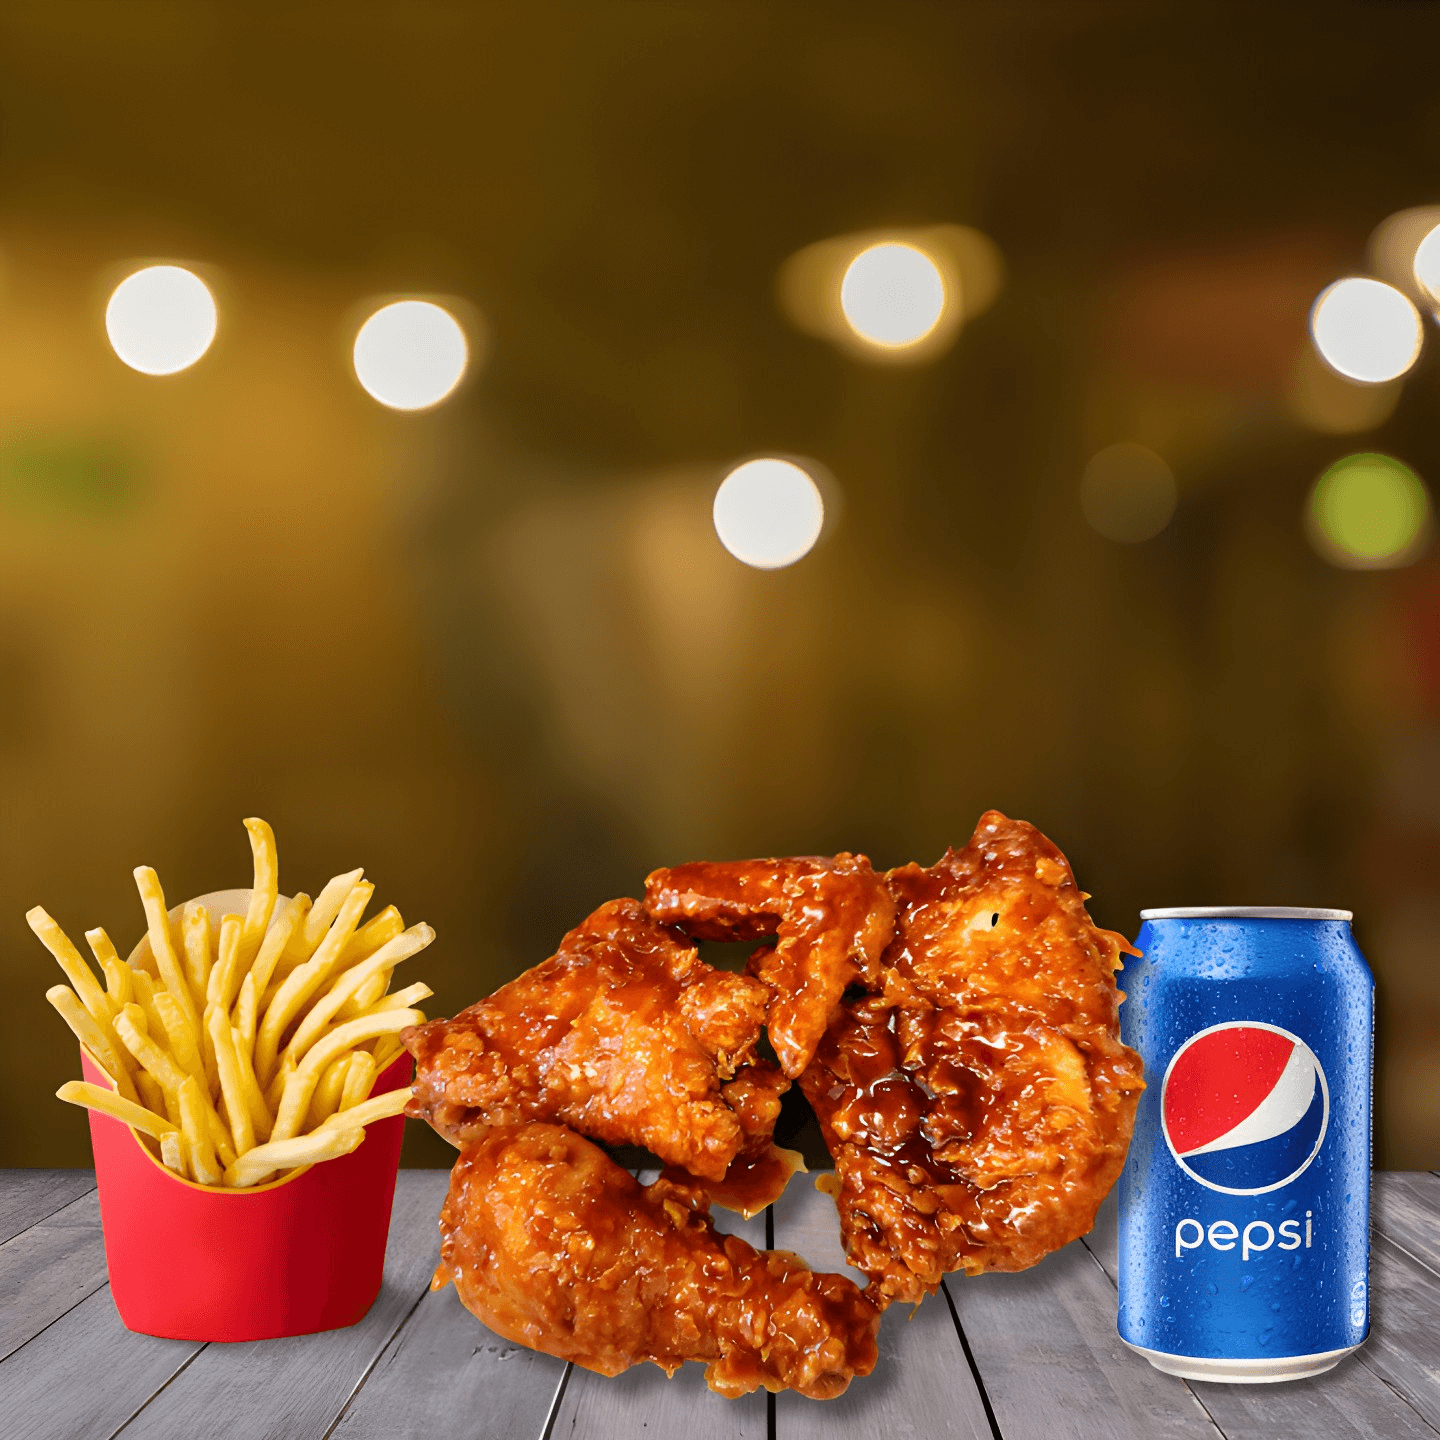 Blaze a Trail of Flavor with Our Hot Wings!